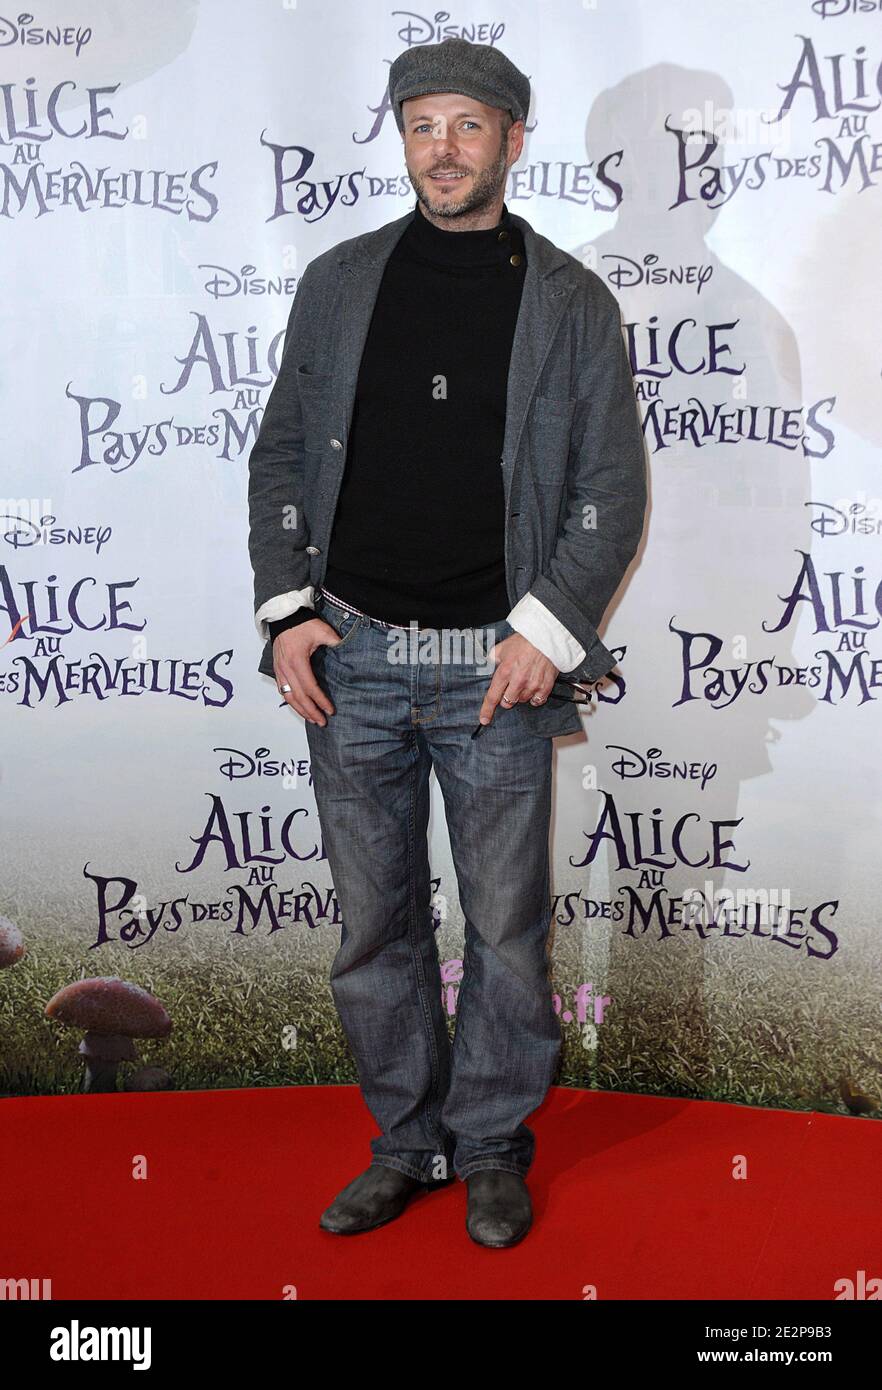 Pierre-Francois Martin Laval attending the premiere of 'Alice in Wonderland' at the Mogador theatre in Paris, France on March 15, 2010. Photo by Giancarlo Gorassini/ABACAPRESS.COM Stock Photo